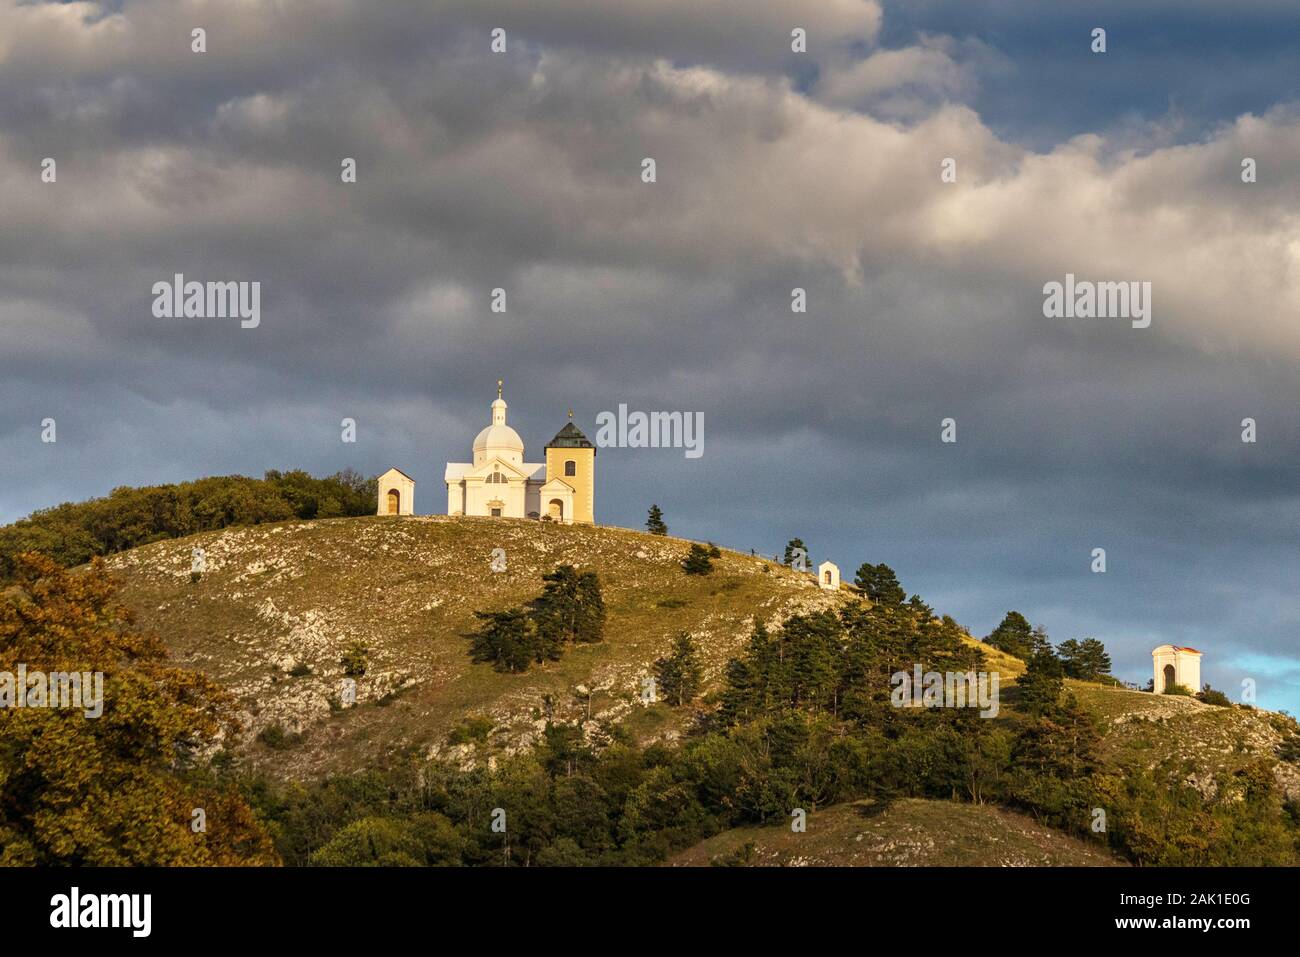 Chapel on a high hill, lit by the setting sun, in the background dramatic sky, Mikulov, Czech republic Stock Photo